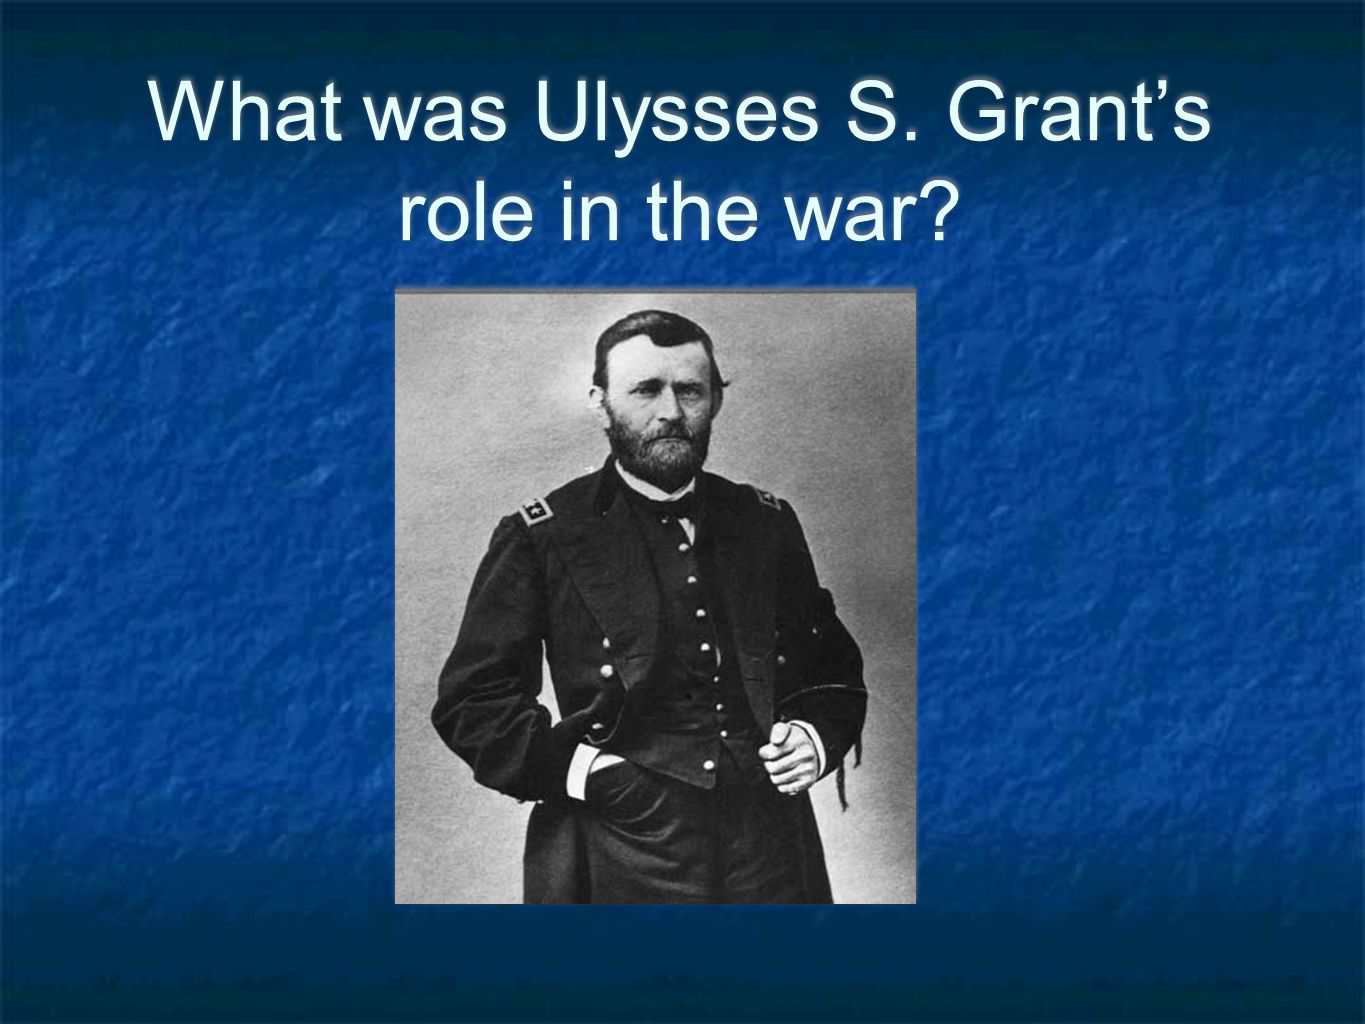 What was Ulysses S. Grant’s role in the war